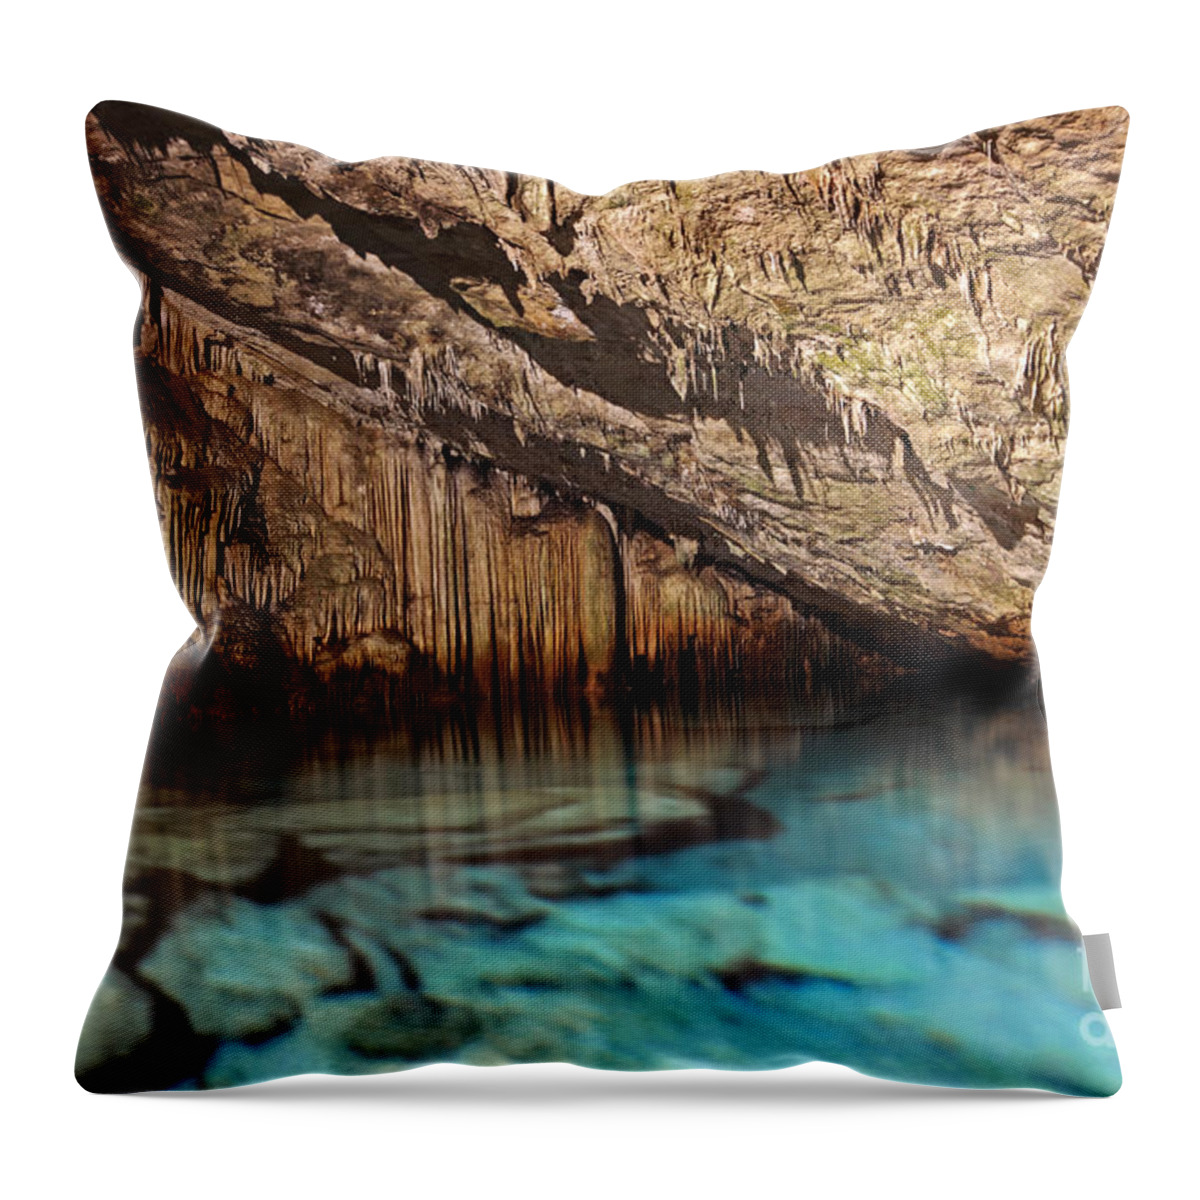 Bermuda Throw Pillow featuring the photograph Grotto in Bermuda by Charline Xia